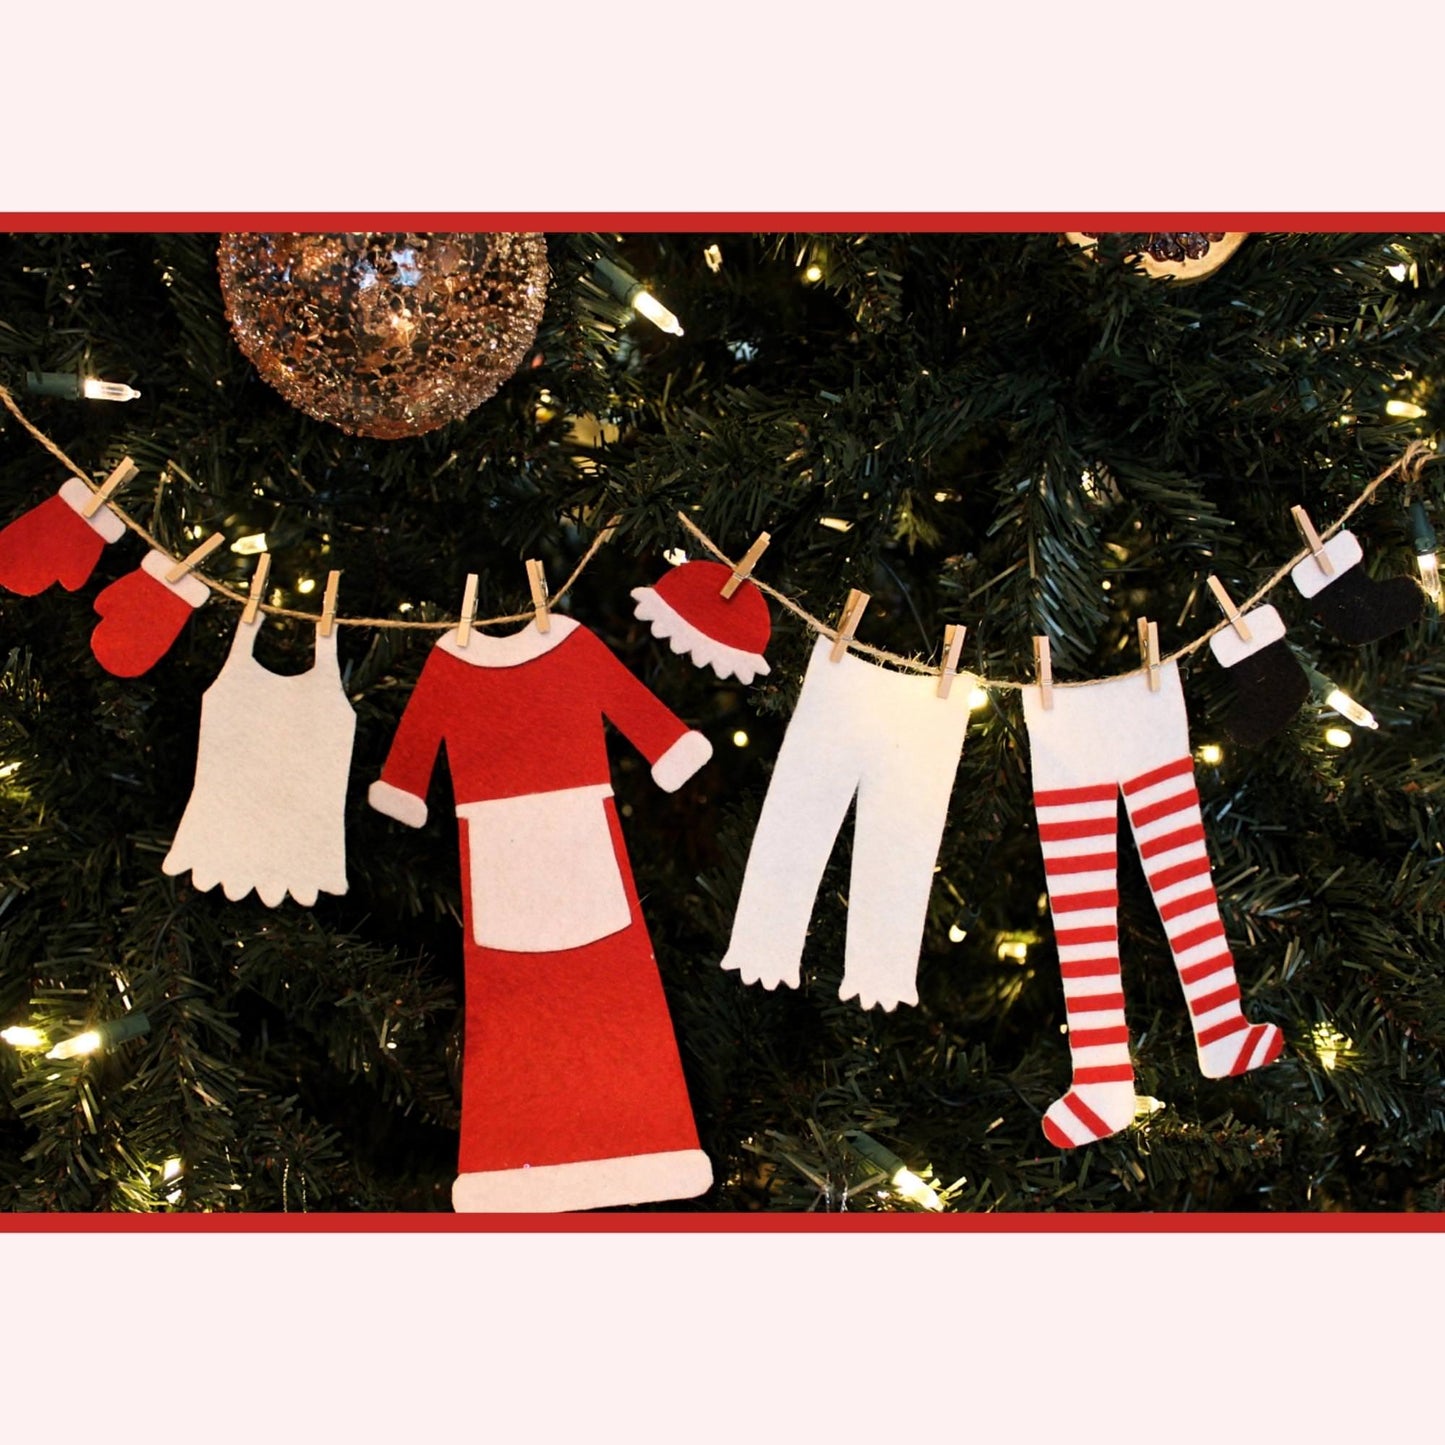 Mrs Claus' Clothesline Garland Template